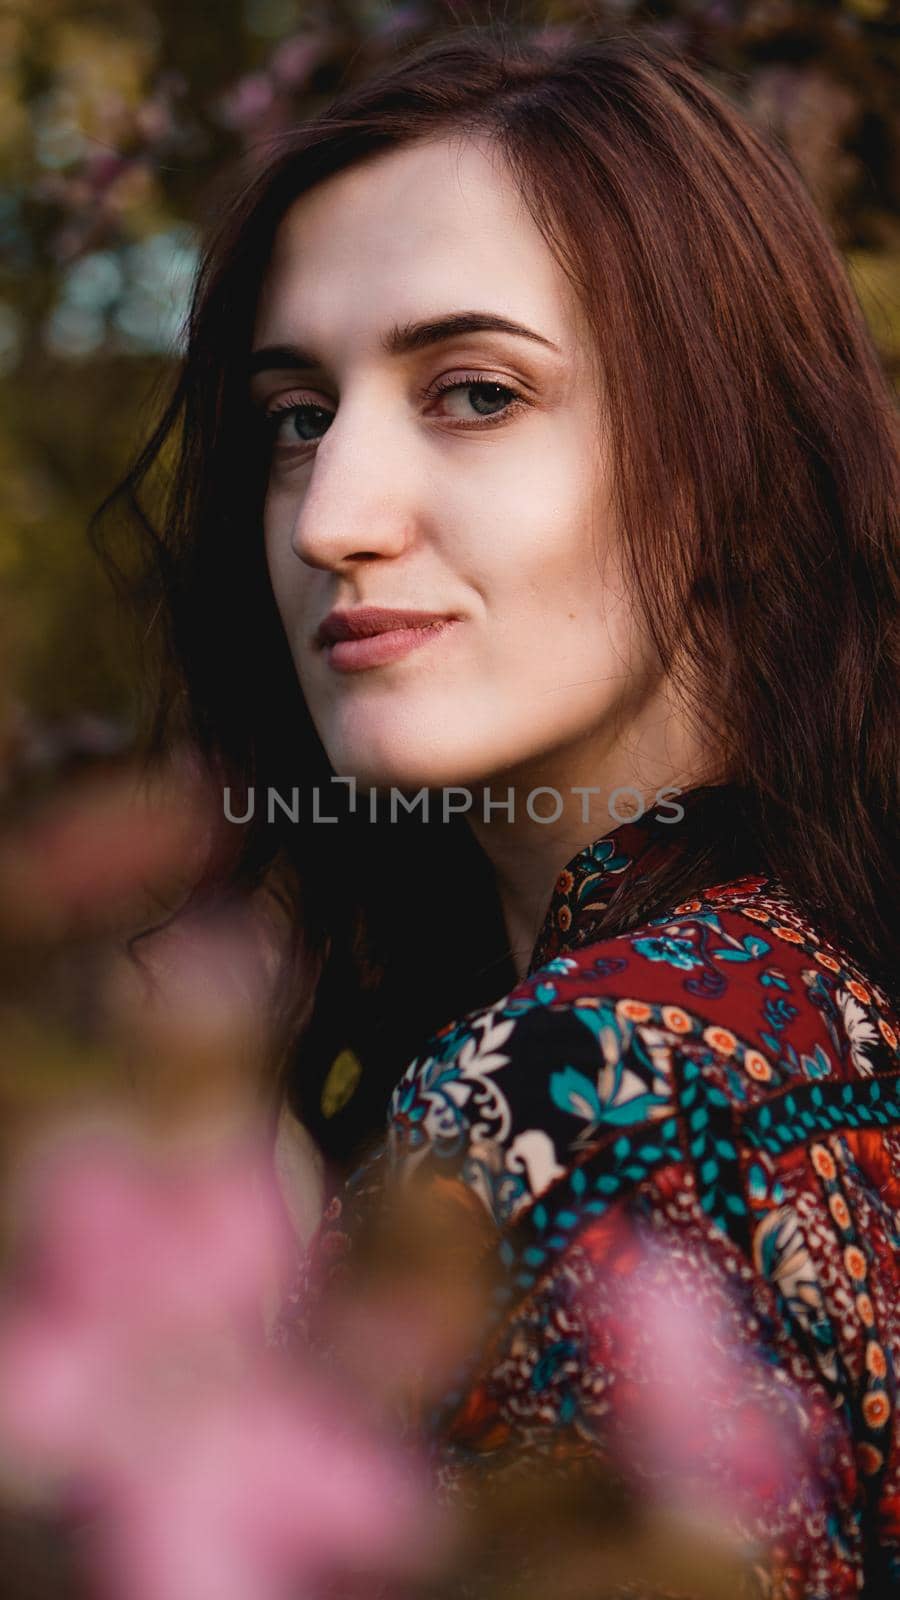 Beautiful young woman in burgundy leaves by natali_brill